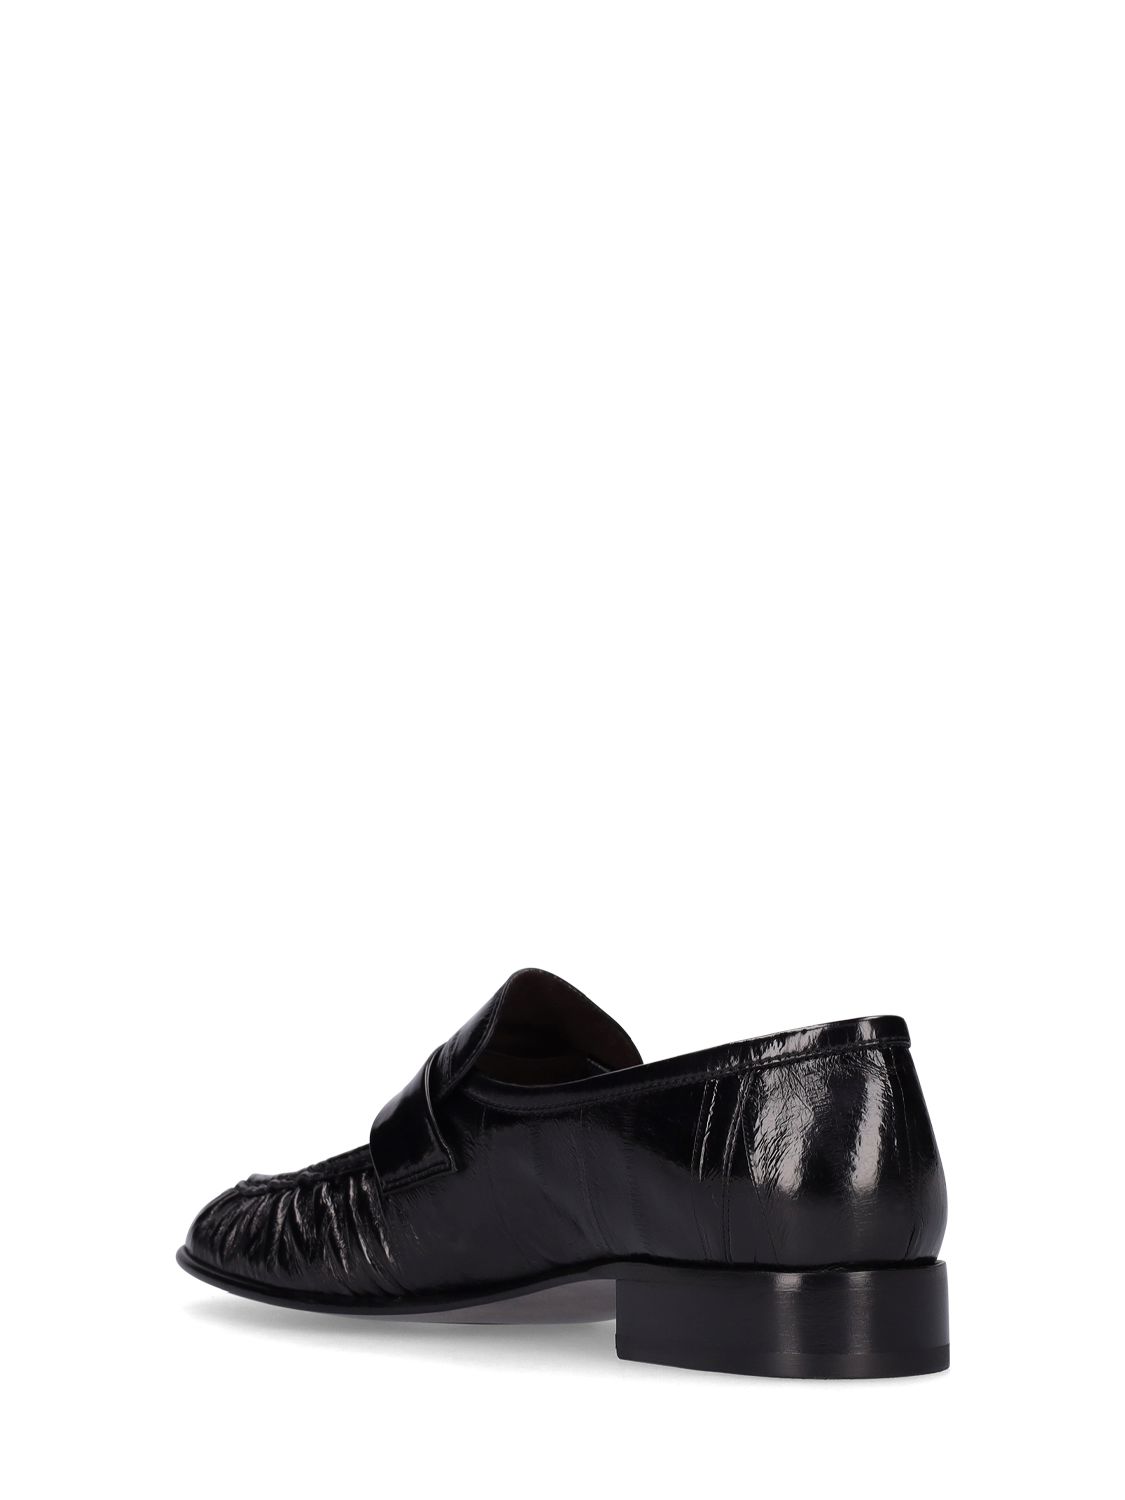 Shop The Row 25mm Soft Eel Leather Loafers In Schwarz